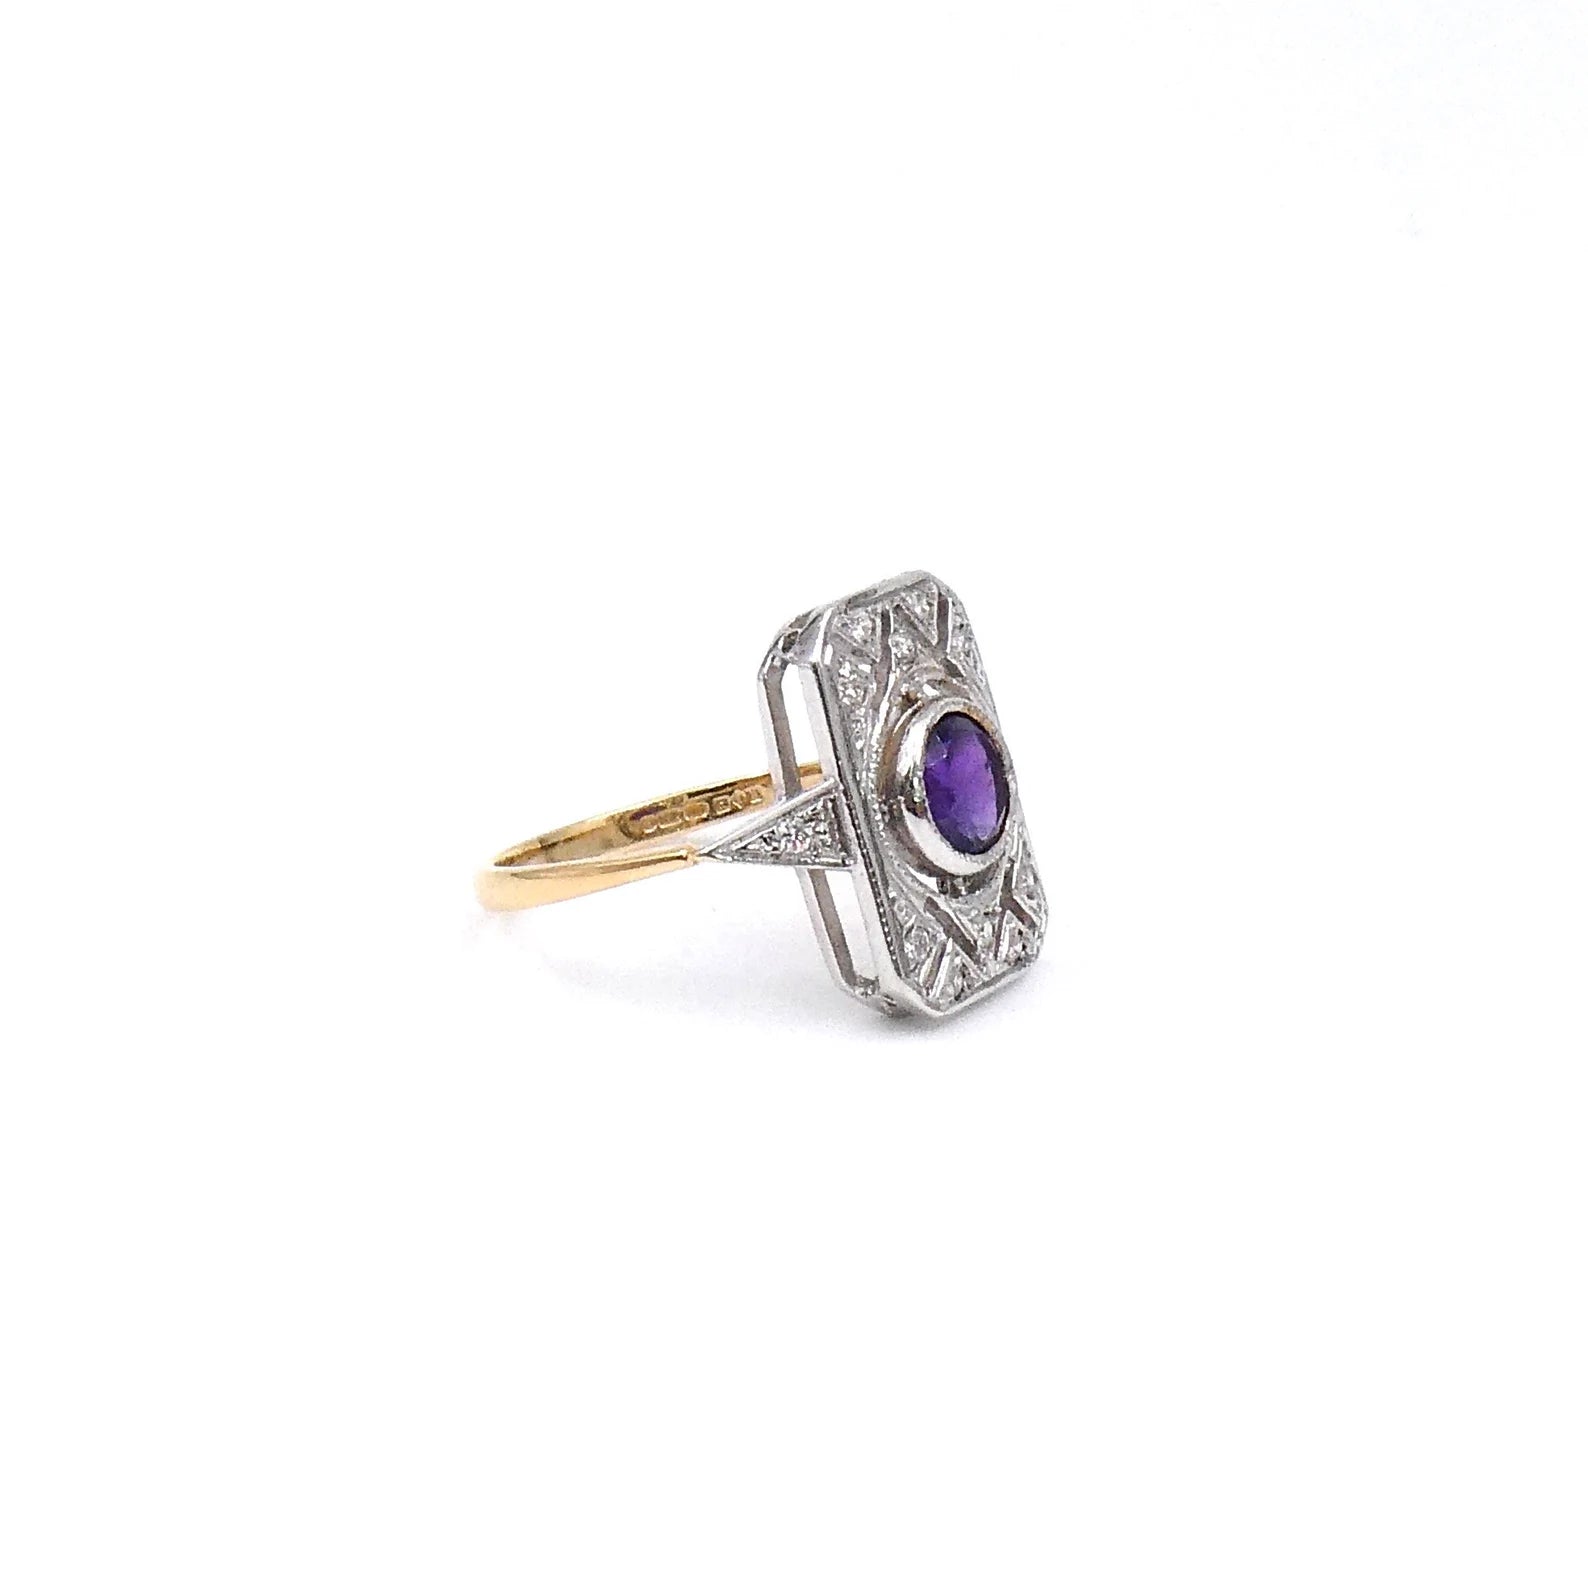 Art Deco style Amethyst diamond ring with an openwork design 18kt gold. - Collected